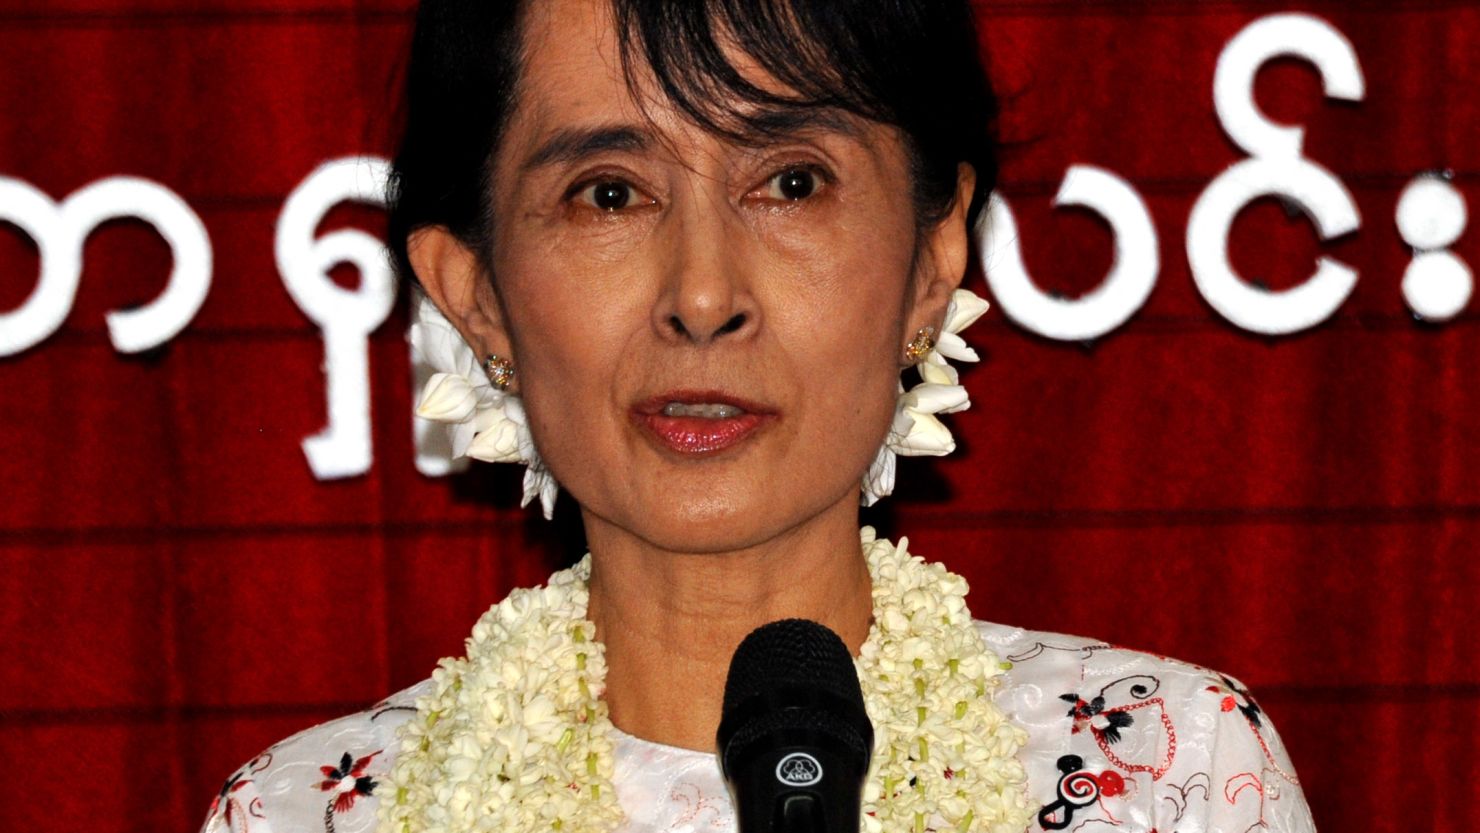 Myanmar democracy icon - now candidate - Aung San Suu Kyi was awarded the prize while under house arrest.